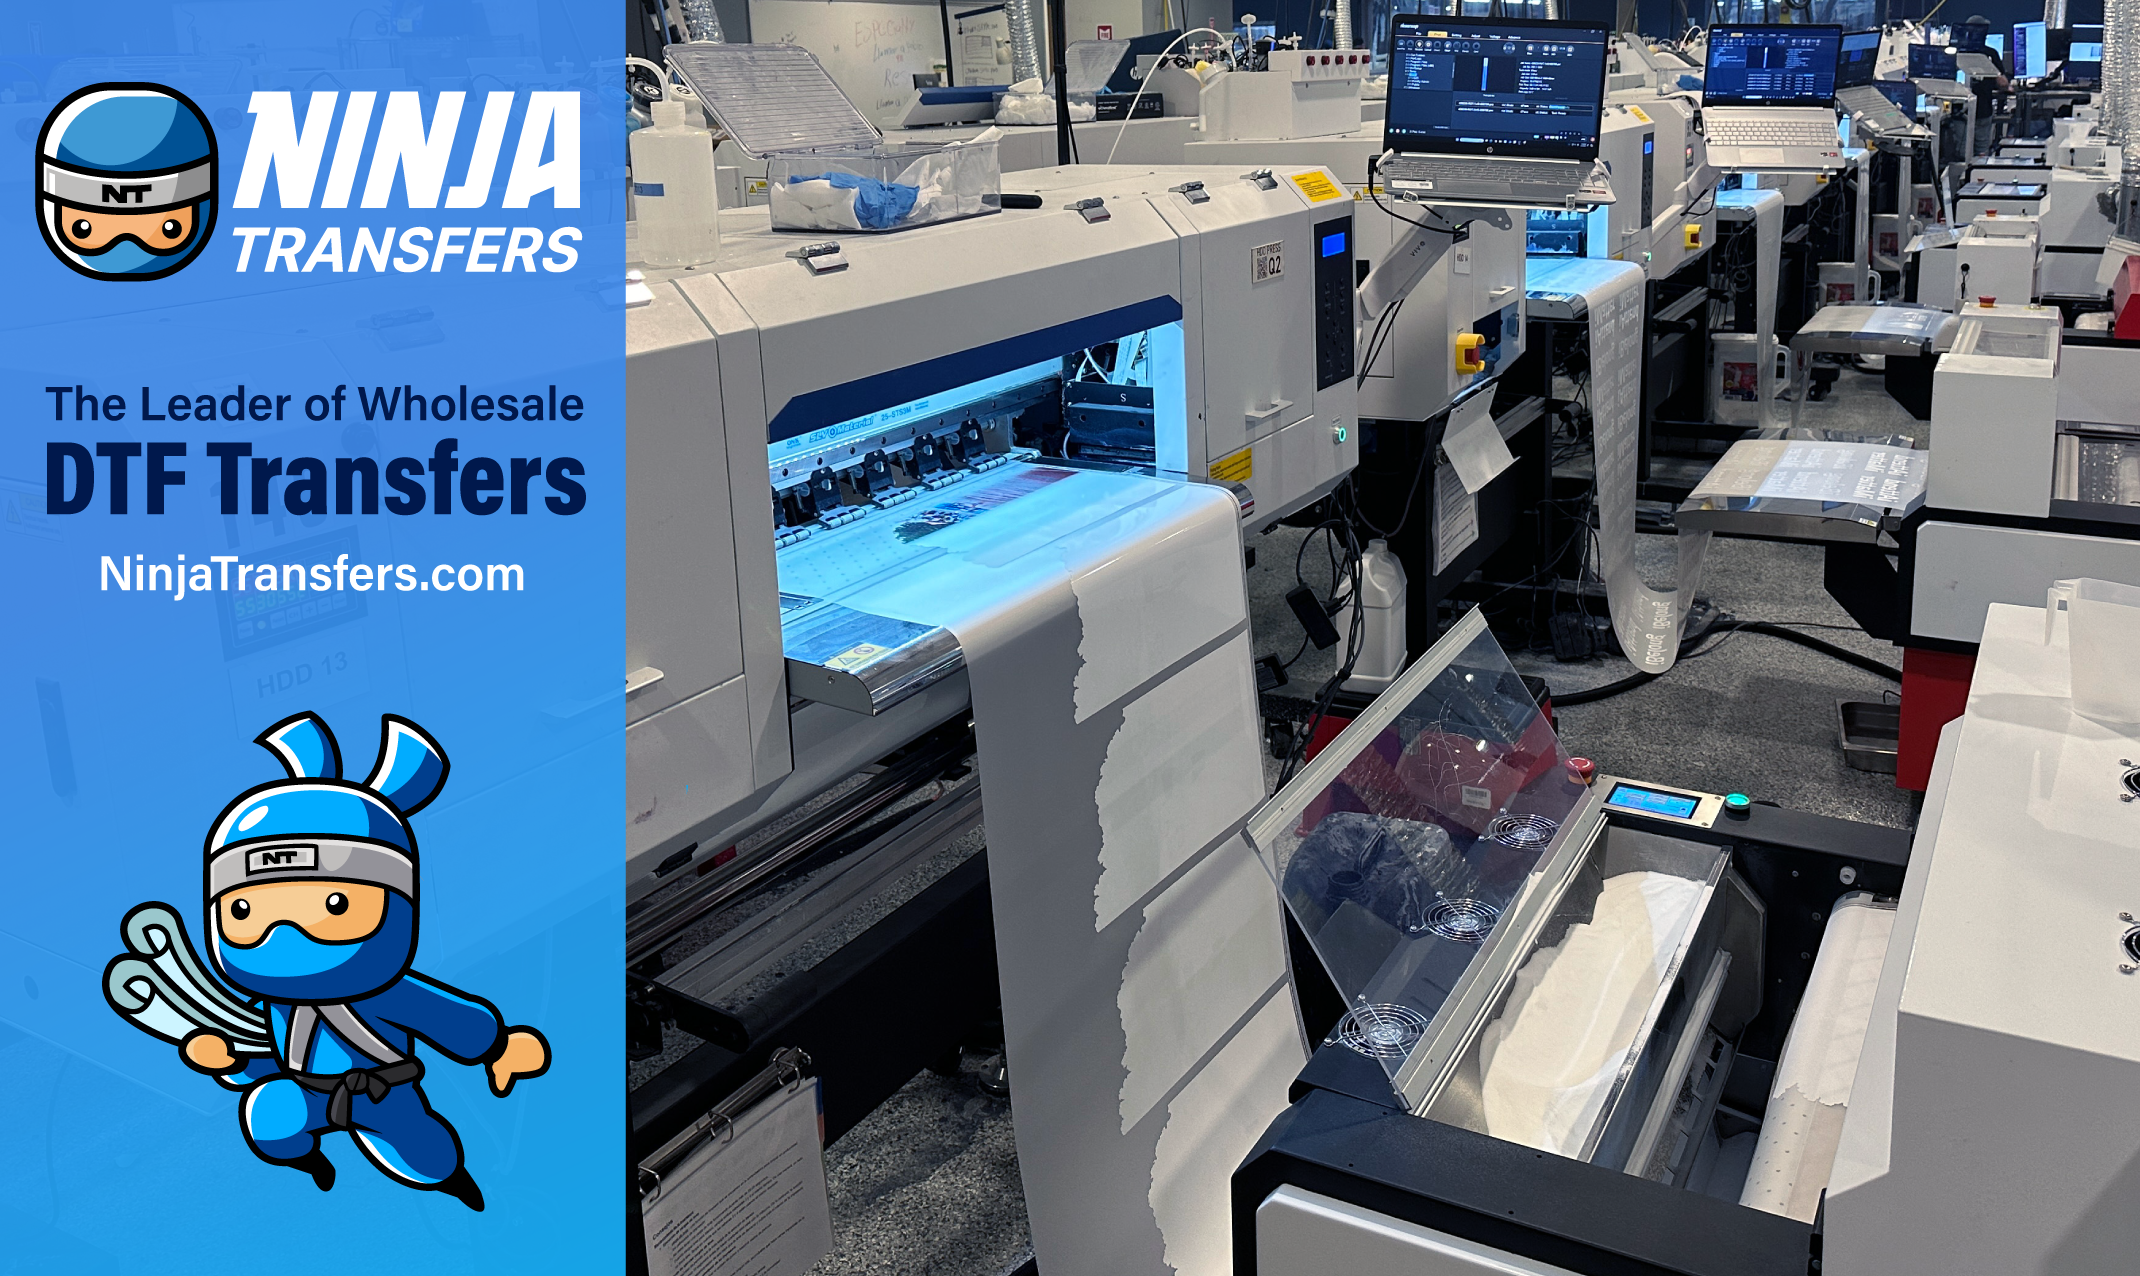 Ninja Transfers Announces Same Day Shipping with Low Cost Next Day Delivery